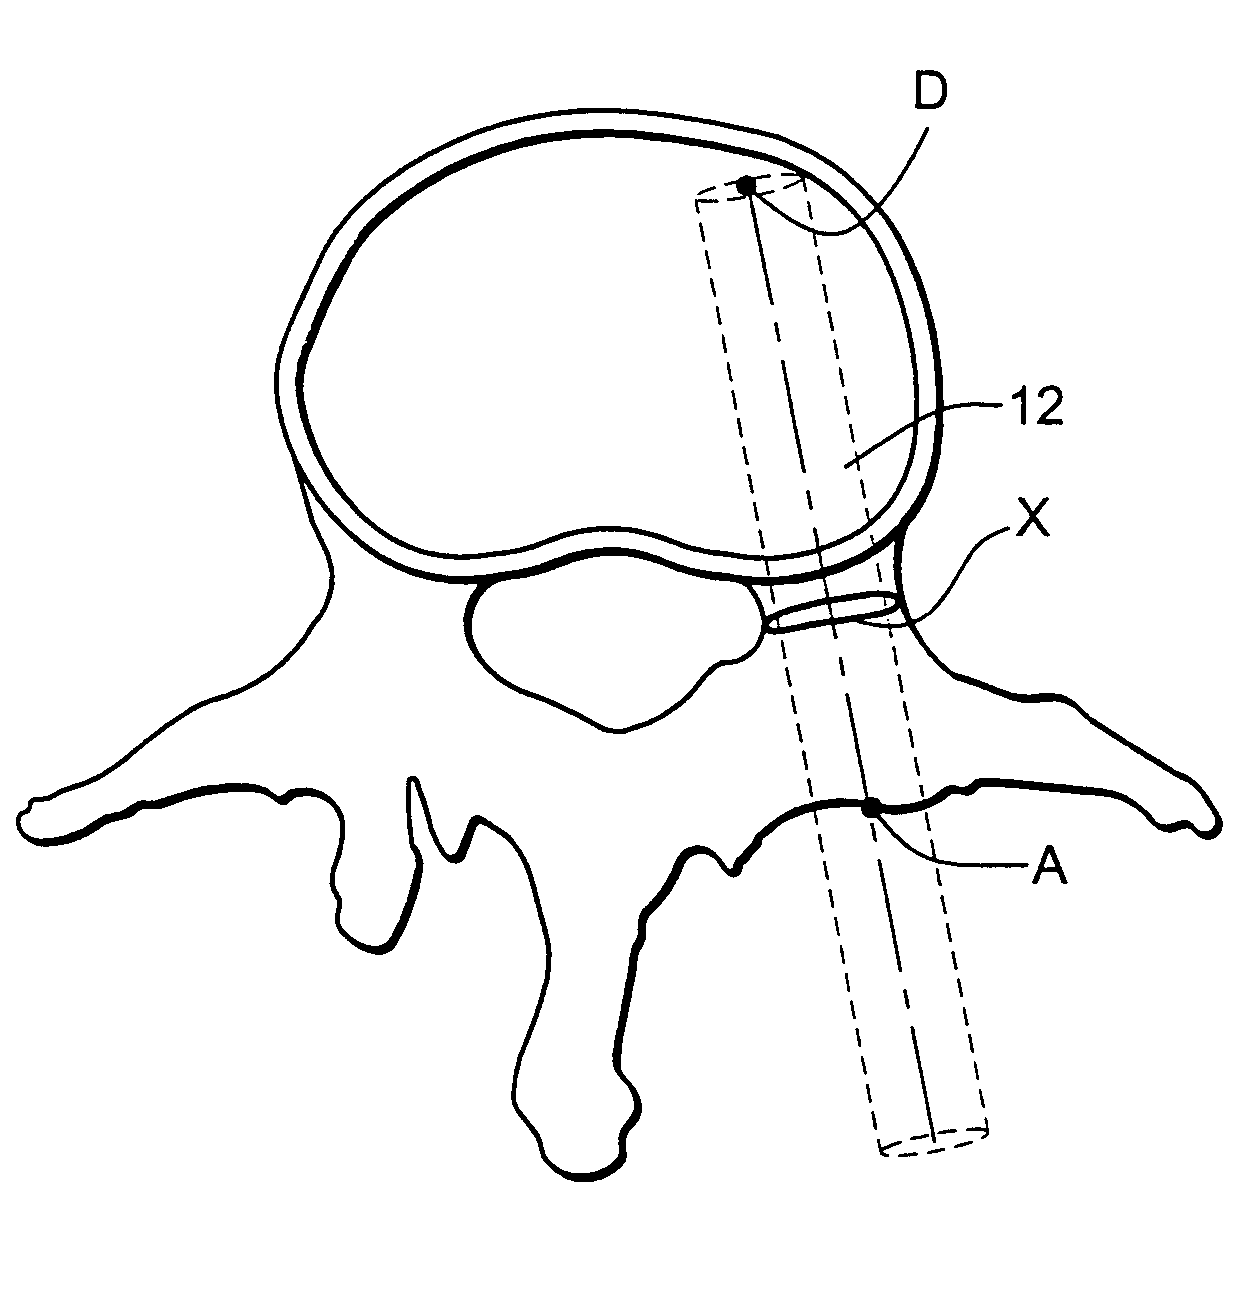 Method of improving pedicle screw placement in spinal surgery